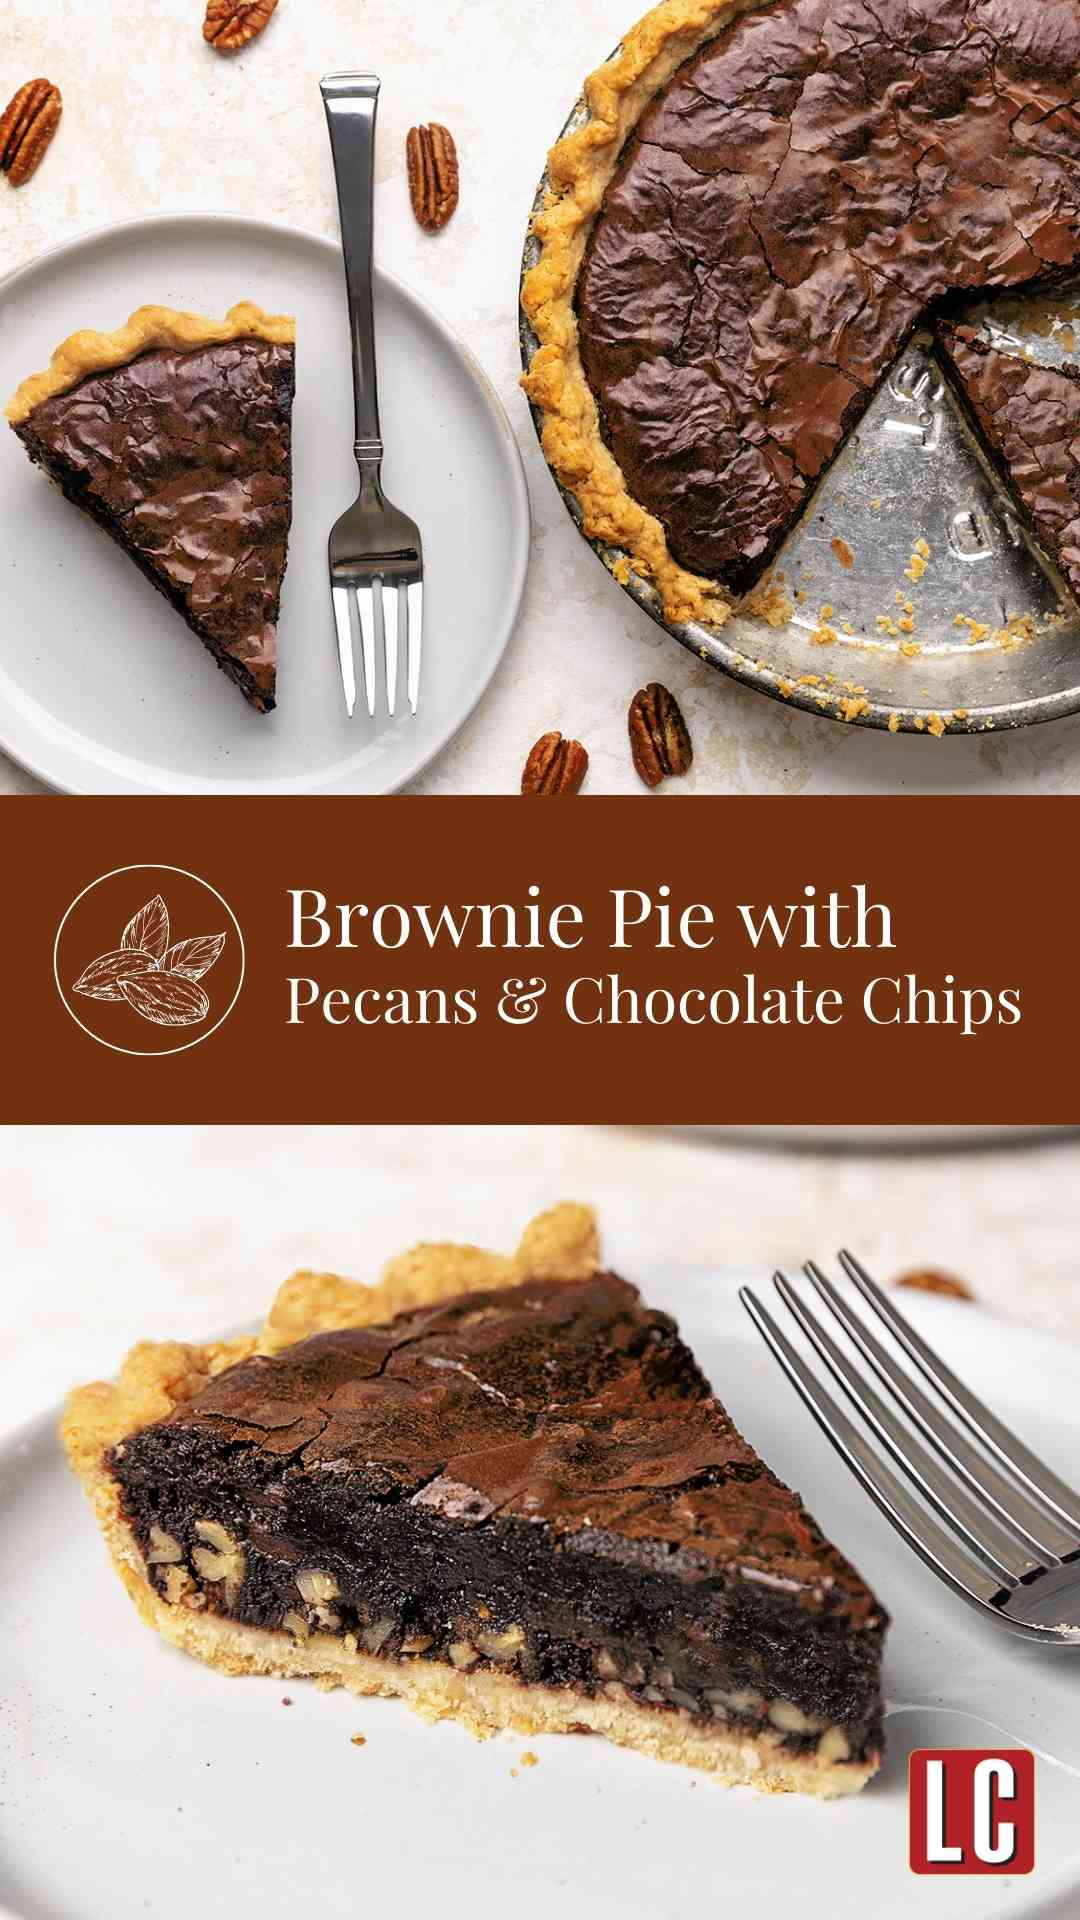 Two slices of brownie pie on plates with the remaining pie nearby.